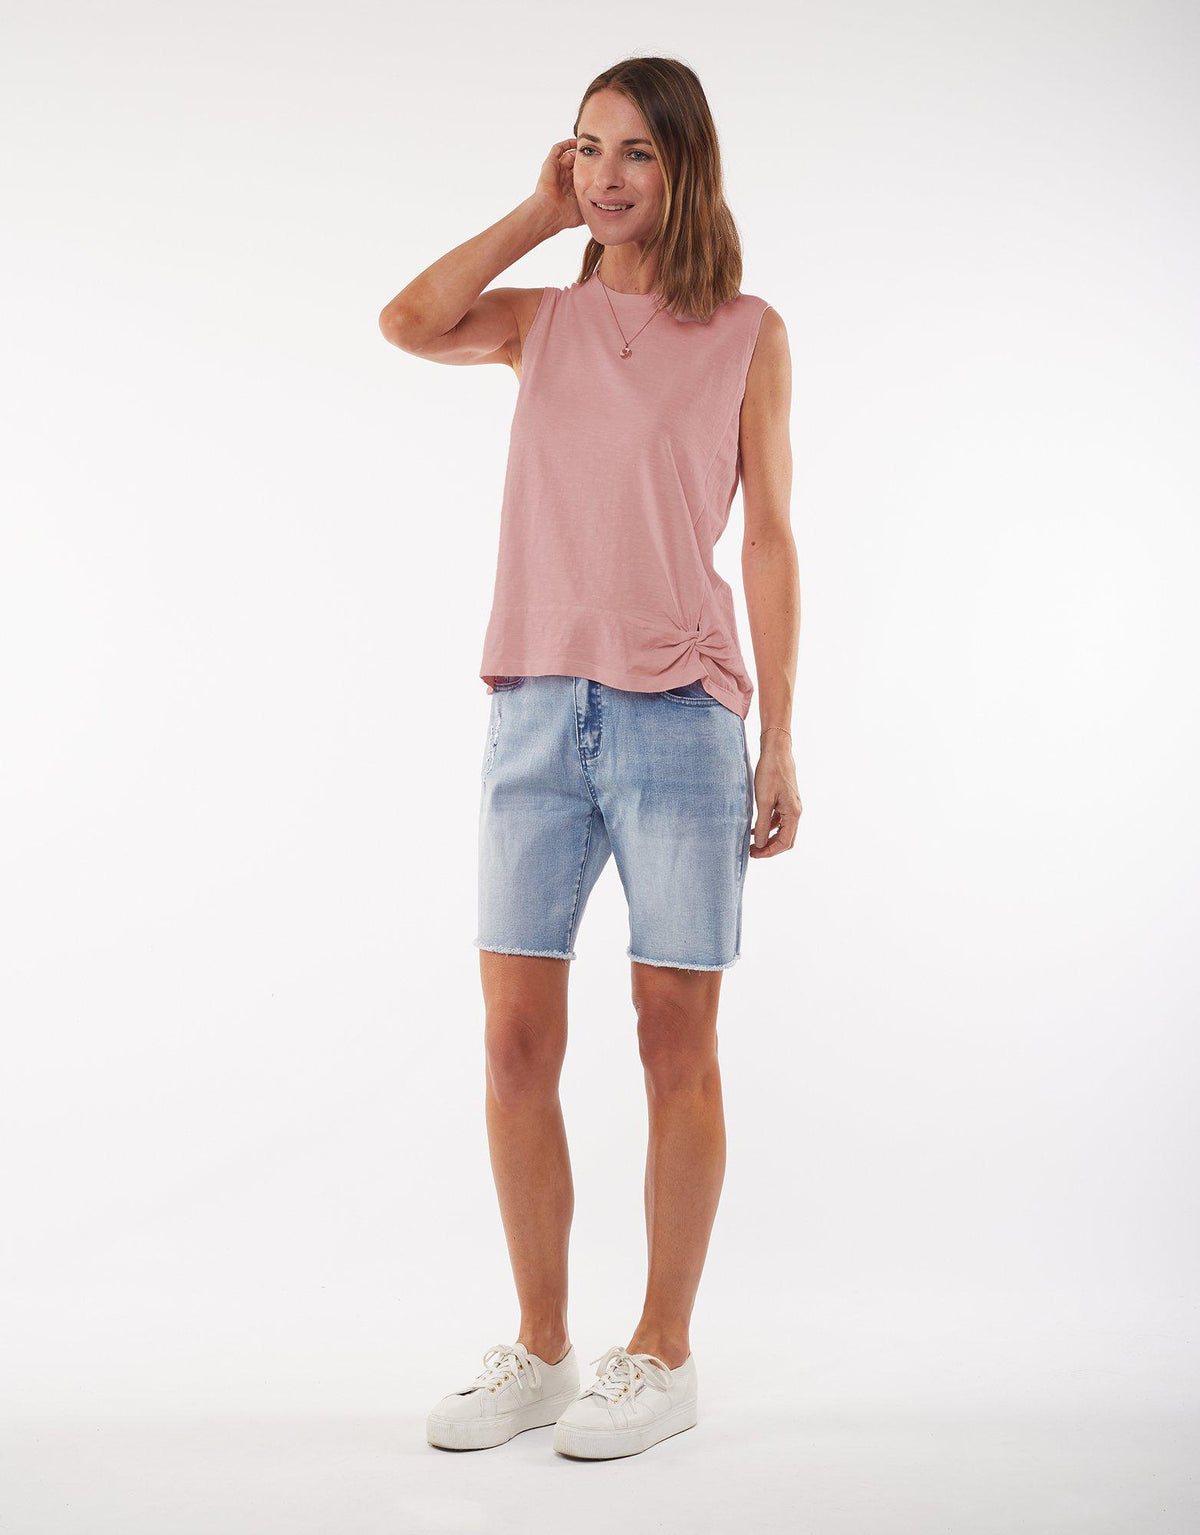 Knot Front Crop Tank - Pink - Foxwood - FUDGE Gifts Home Lifestyle